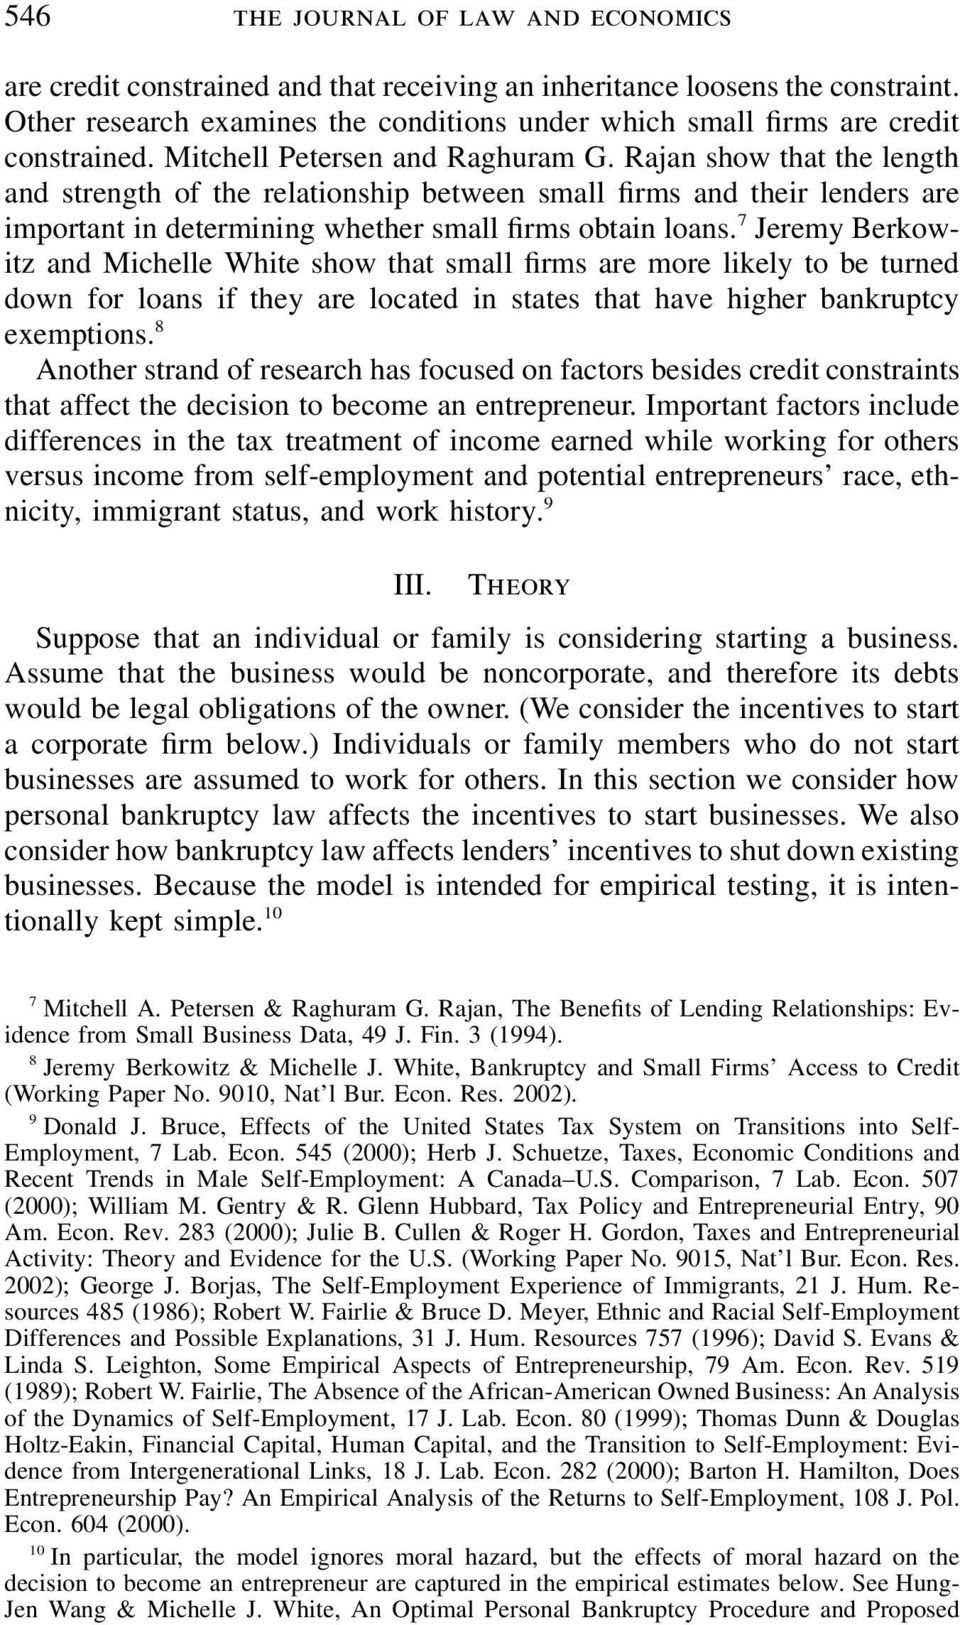 Rajan show that the length and strength of the relationship between small firms and their lenders are important in determining whether small firms obtain loans.